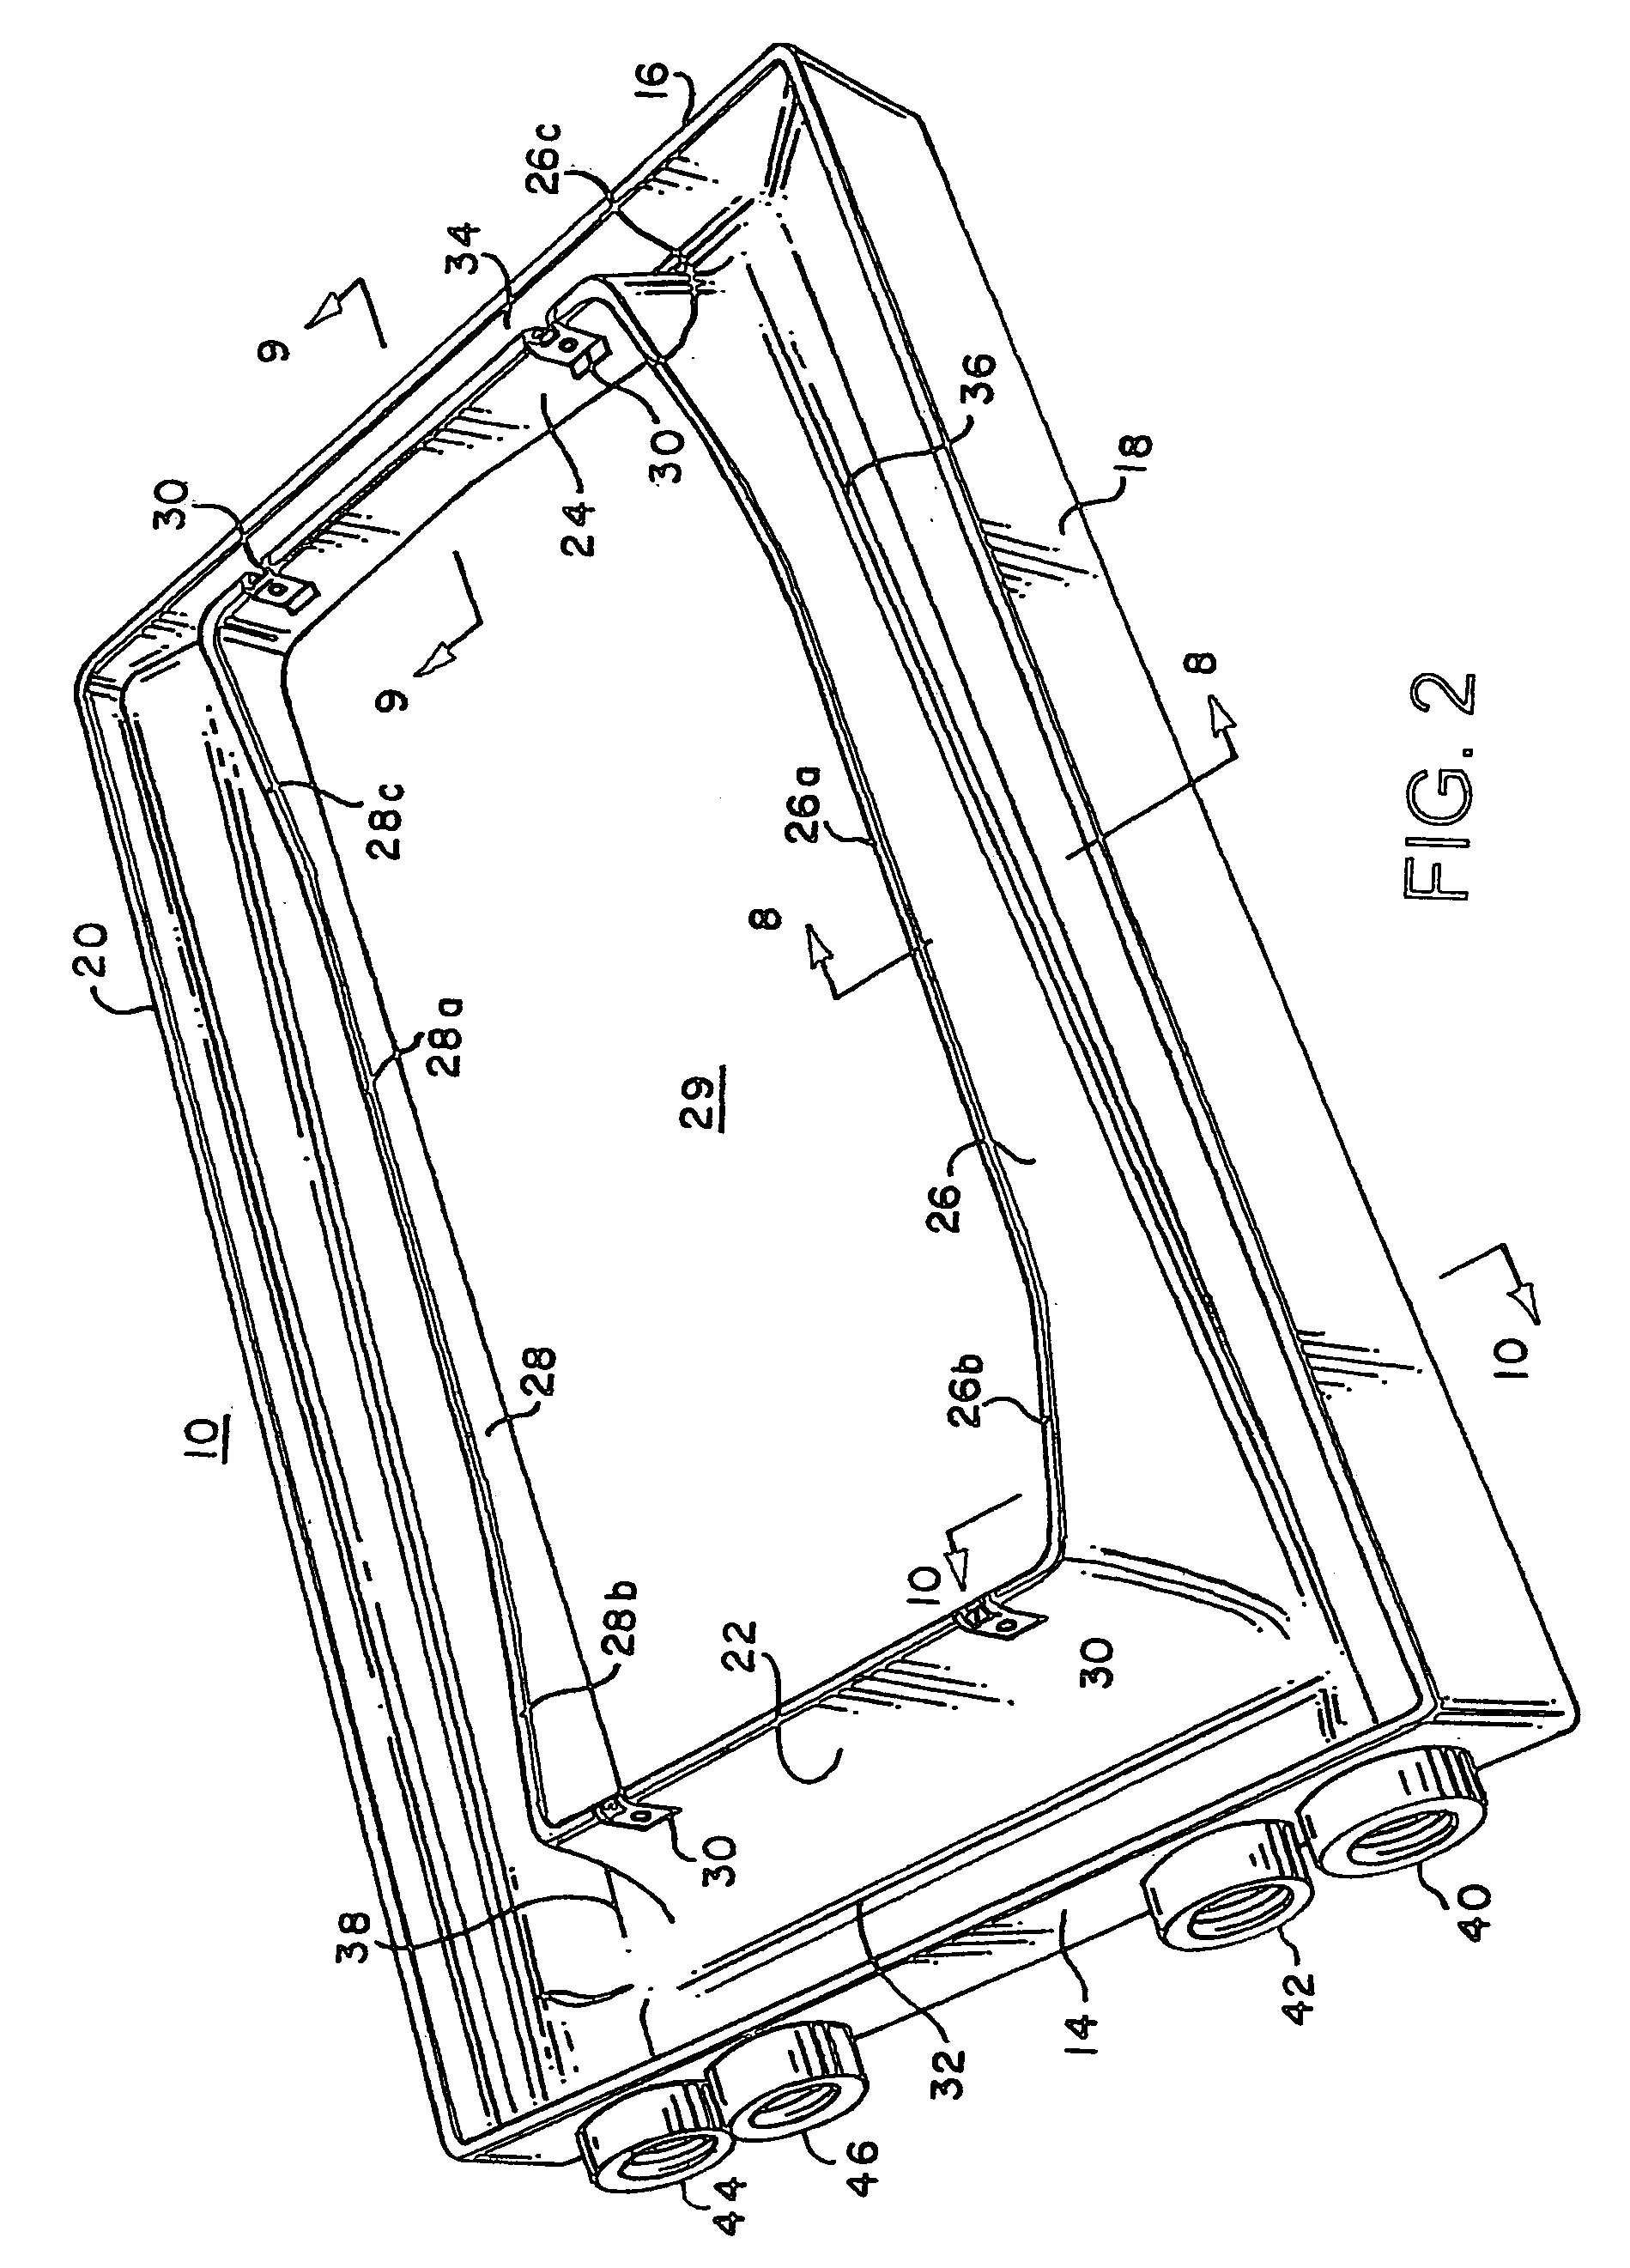 Condensate drain pan for air conditioning system